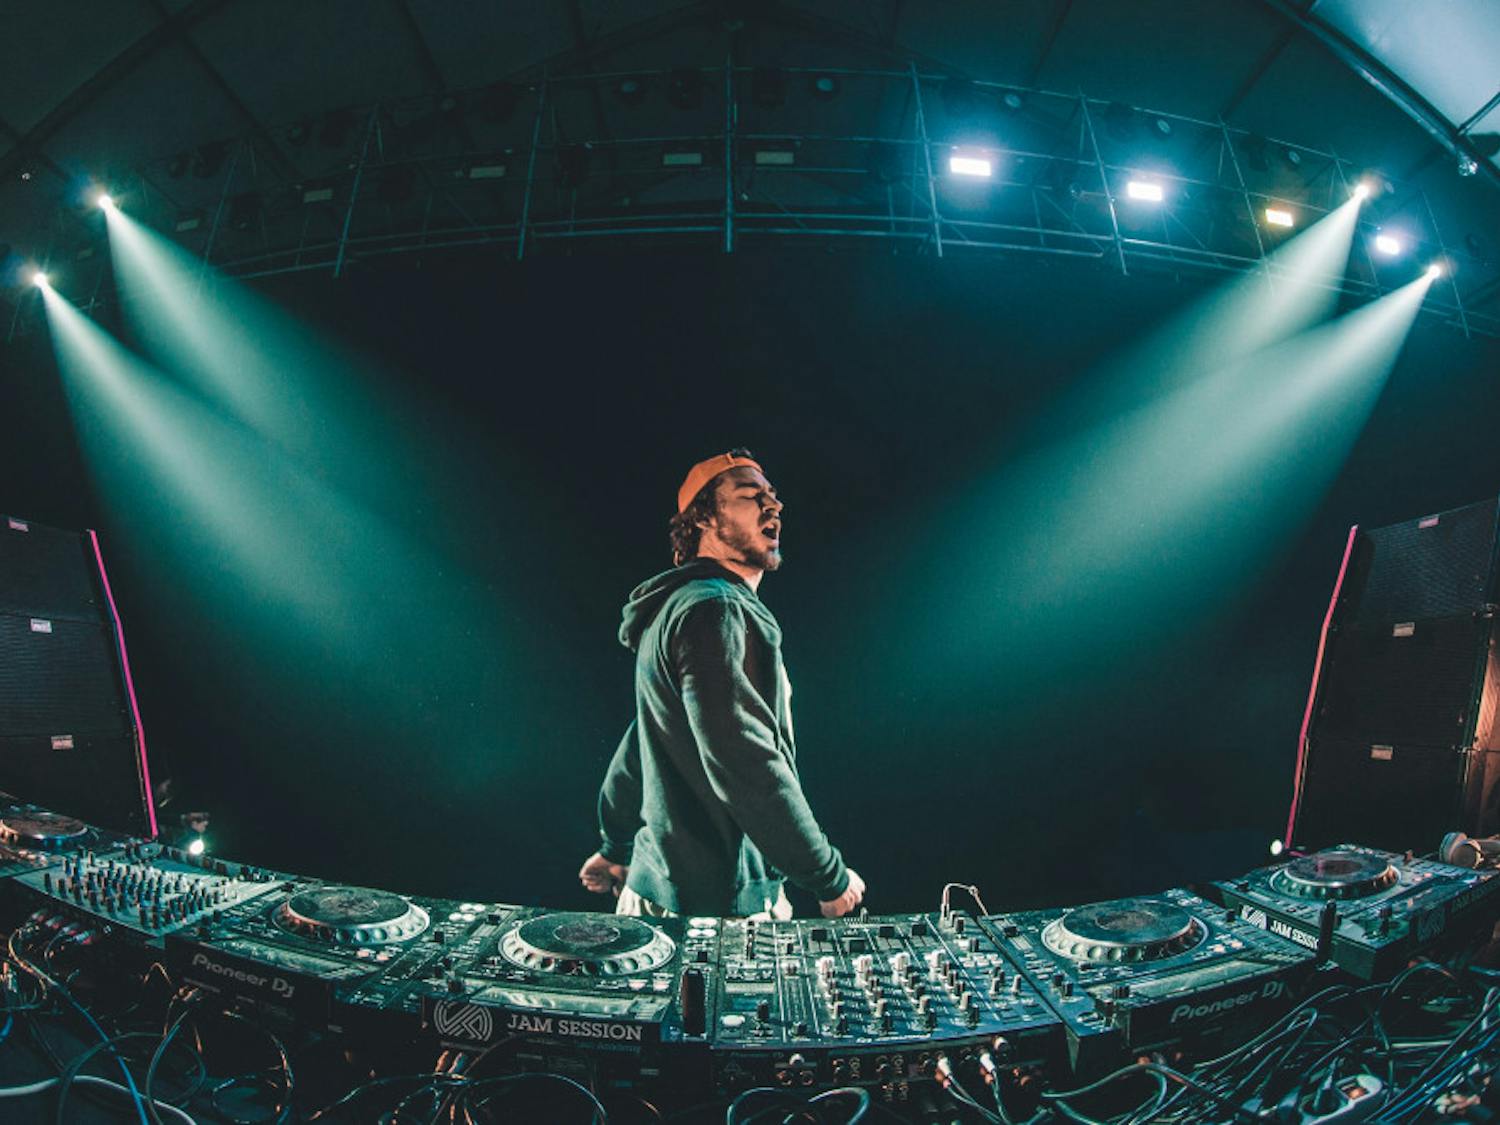 At 21 years old, Crankdat has taken the electronic industry by storm since his music began taking off in 2015. 